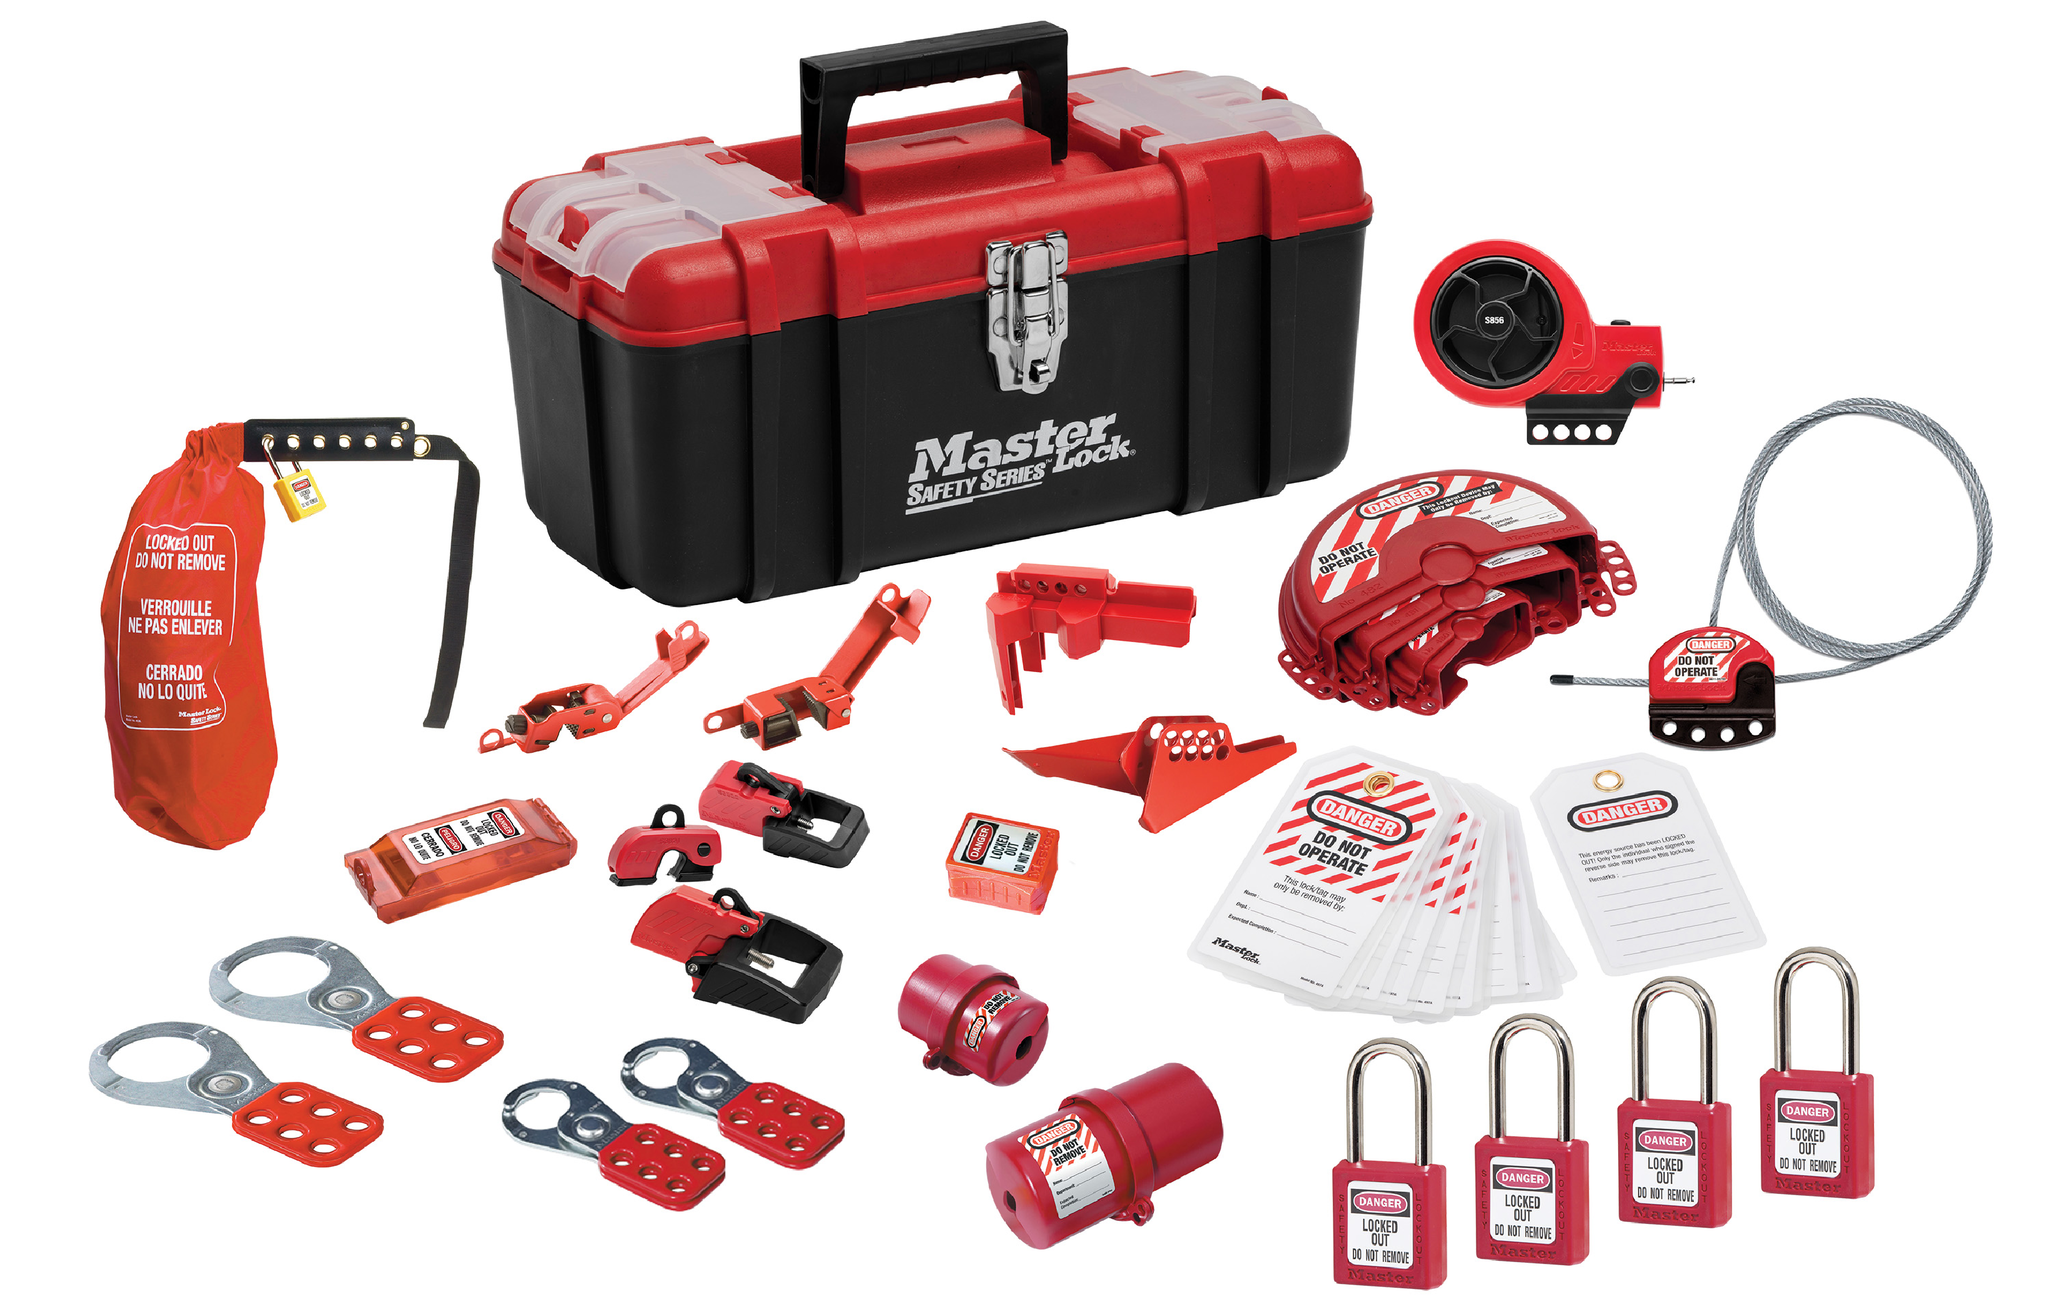 New Lockout kits for locking out valves and electrical applications